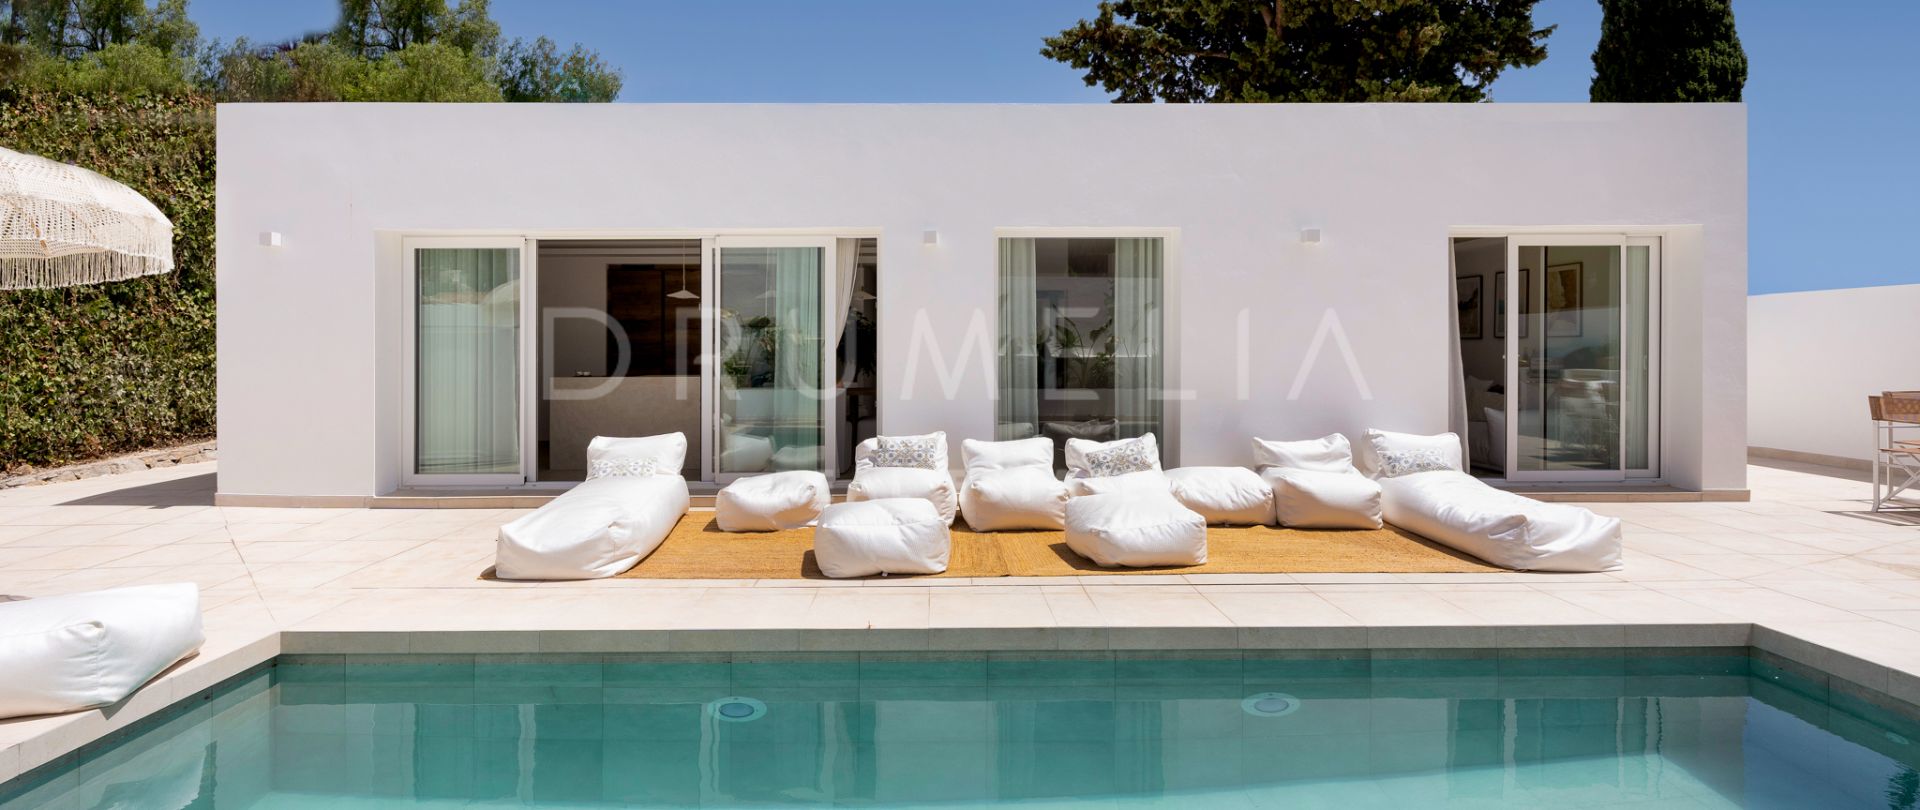 Renovated modern luxury villa with Boho and Scandi elements in Nueva Andalucia, Marbella